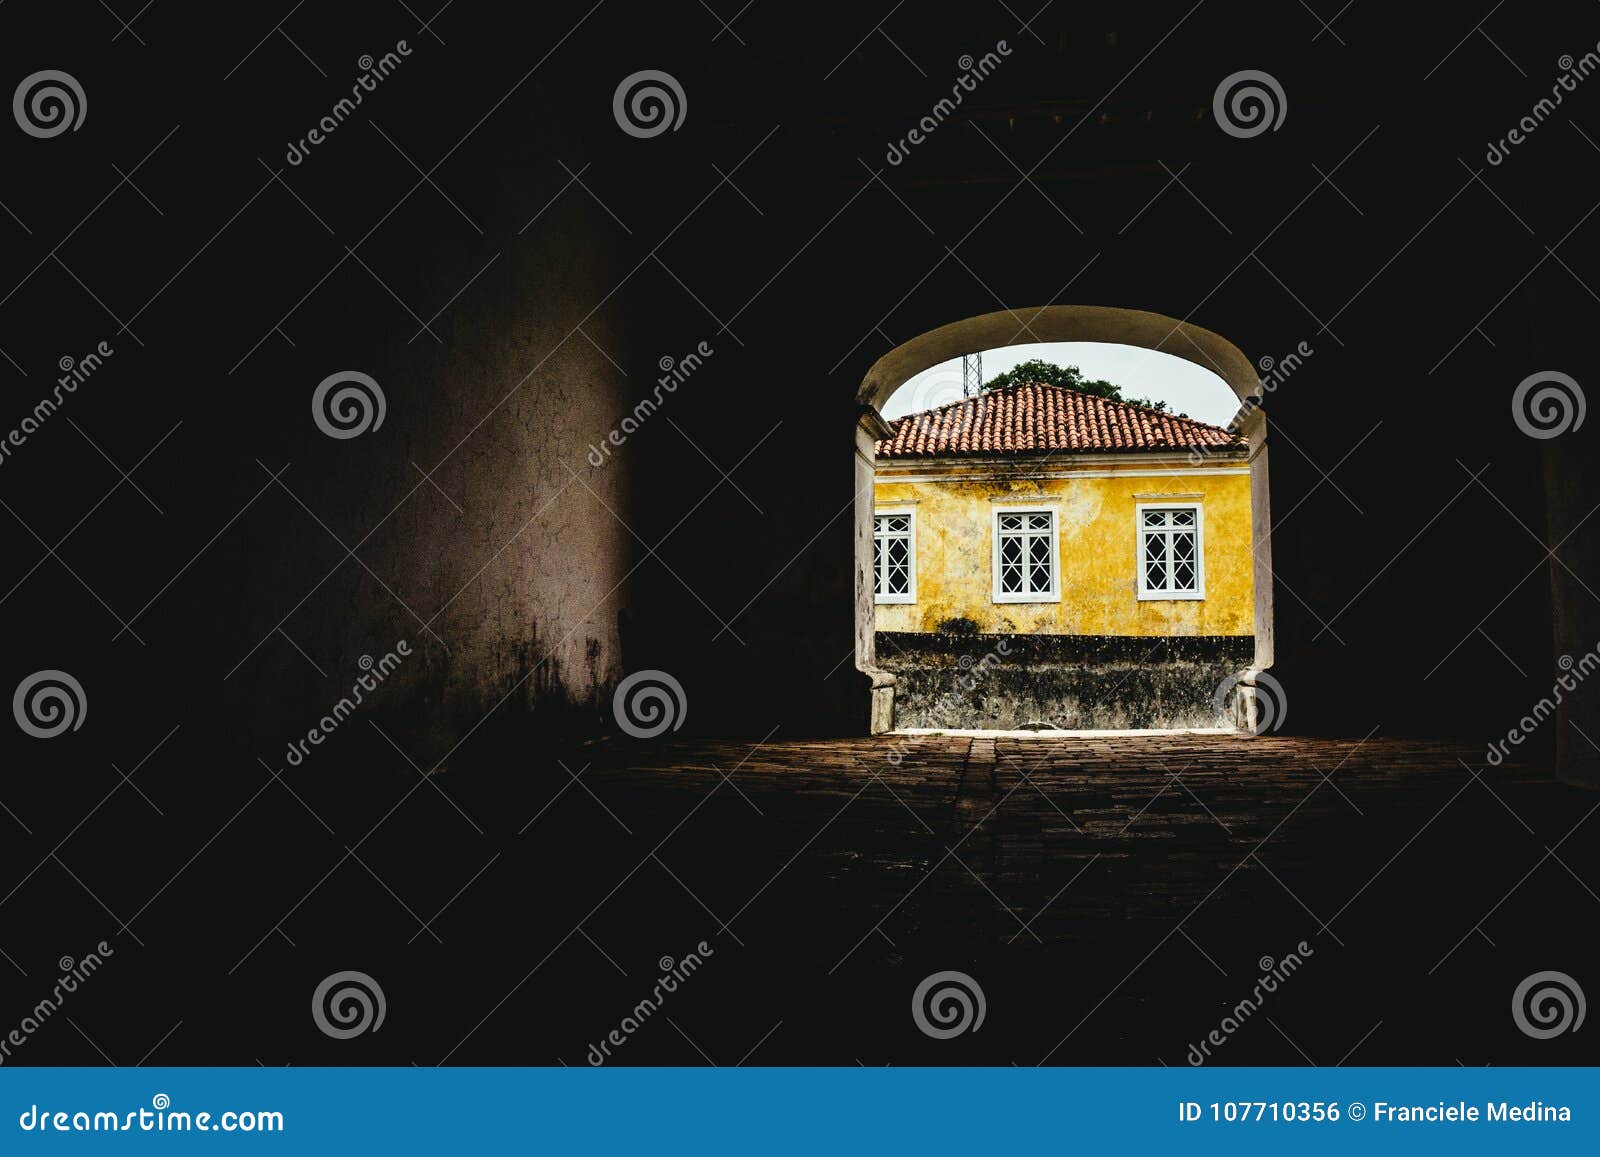 old yellow house in abandoned place and full of stories